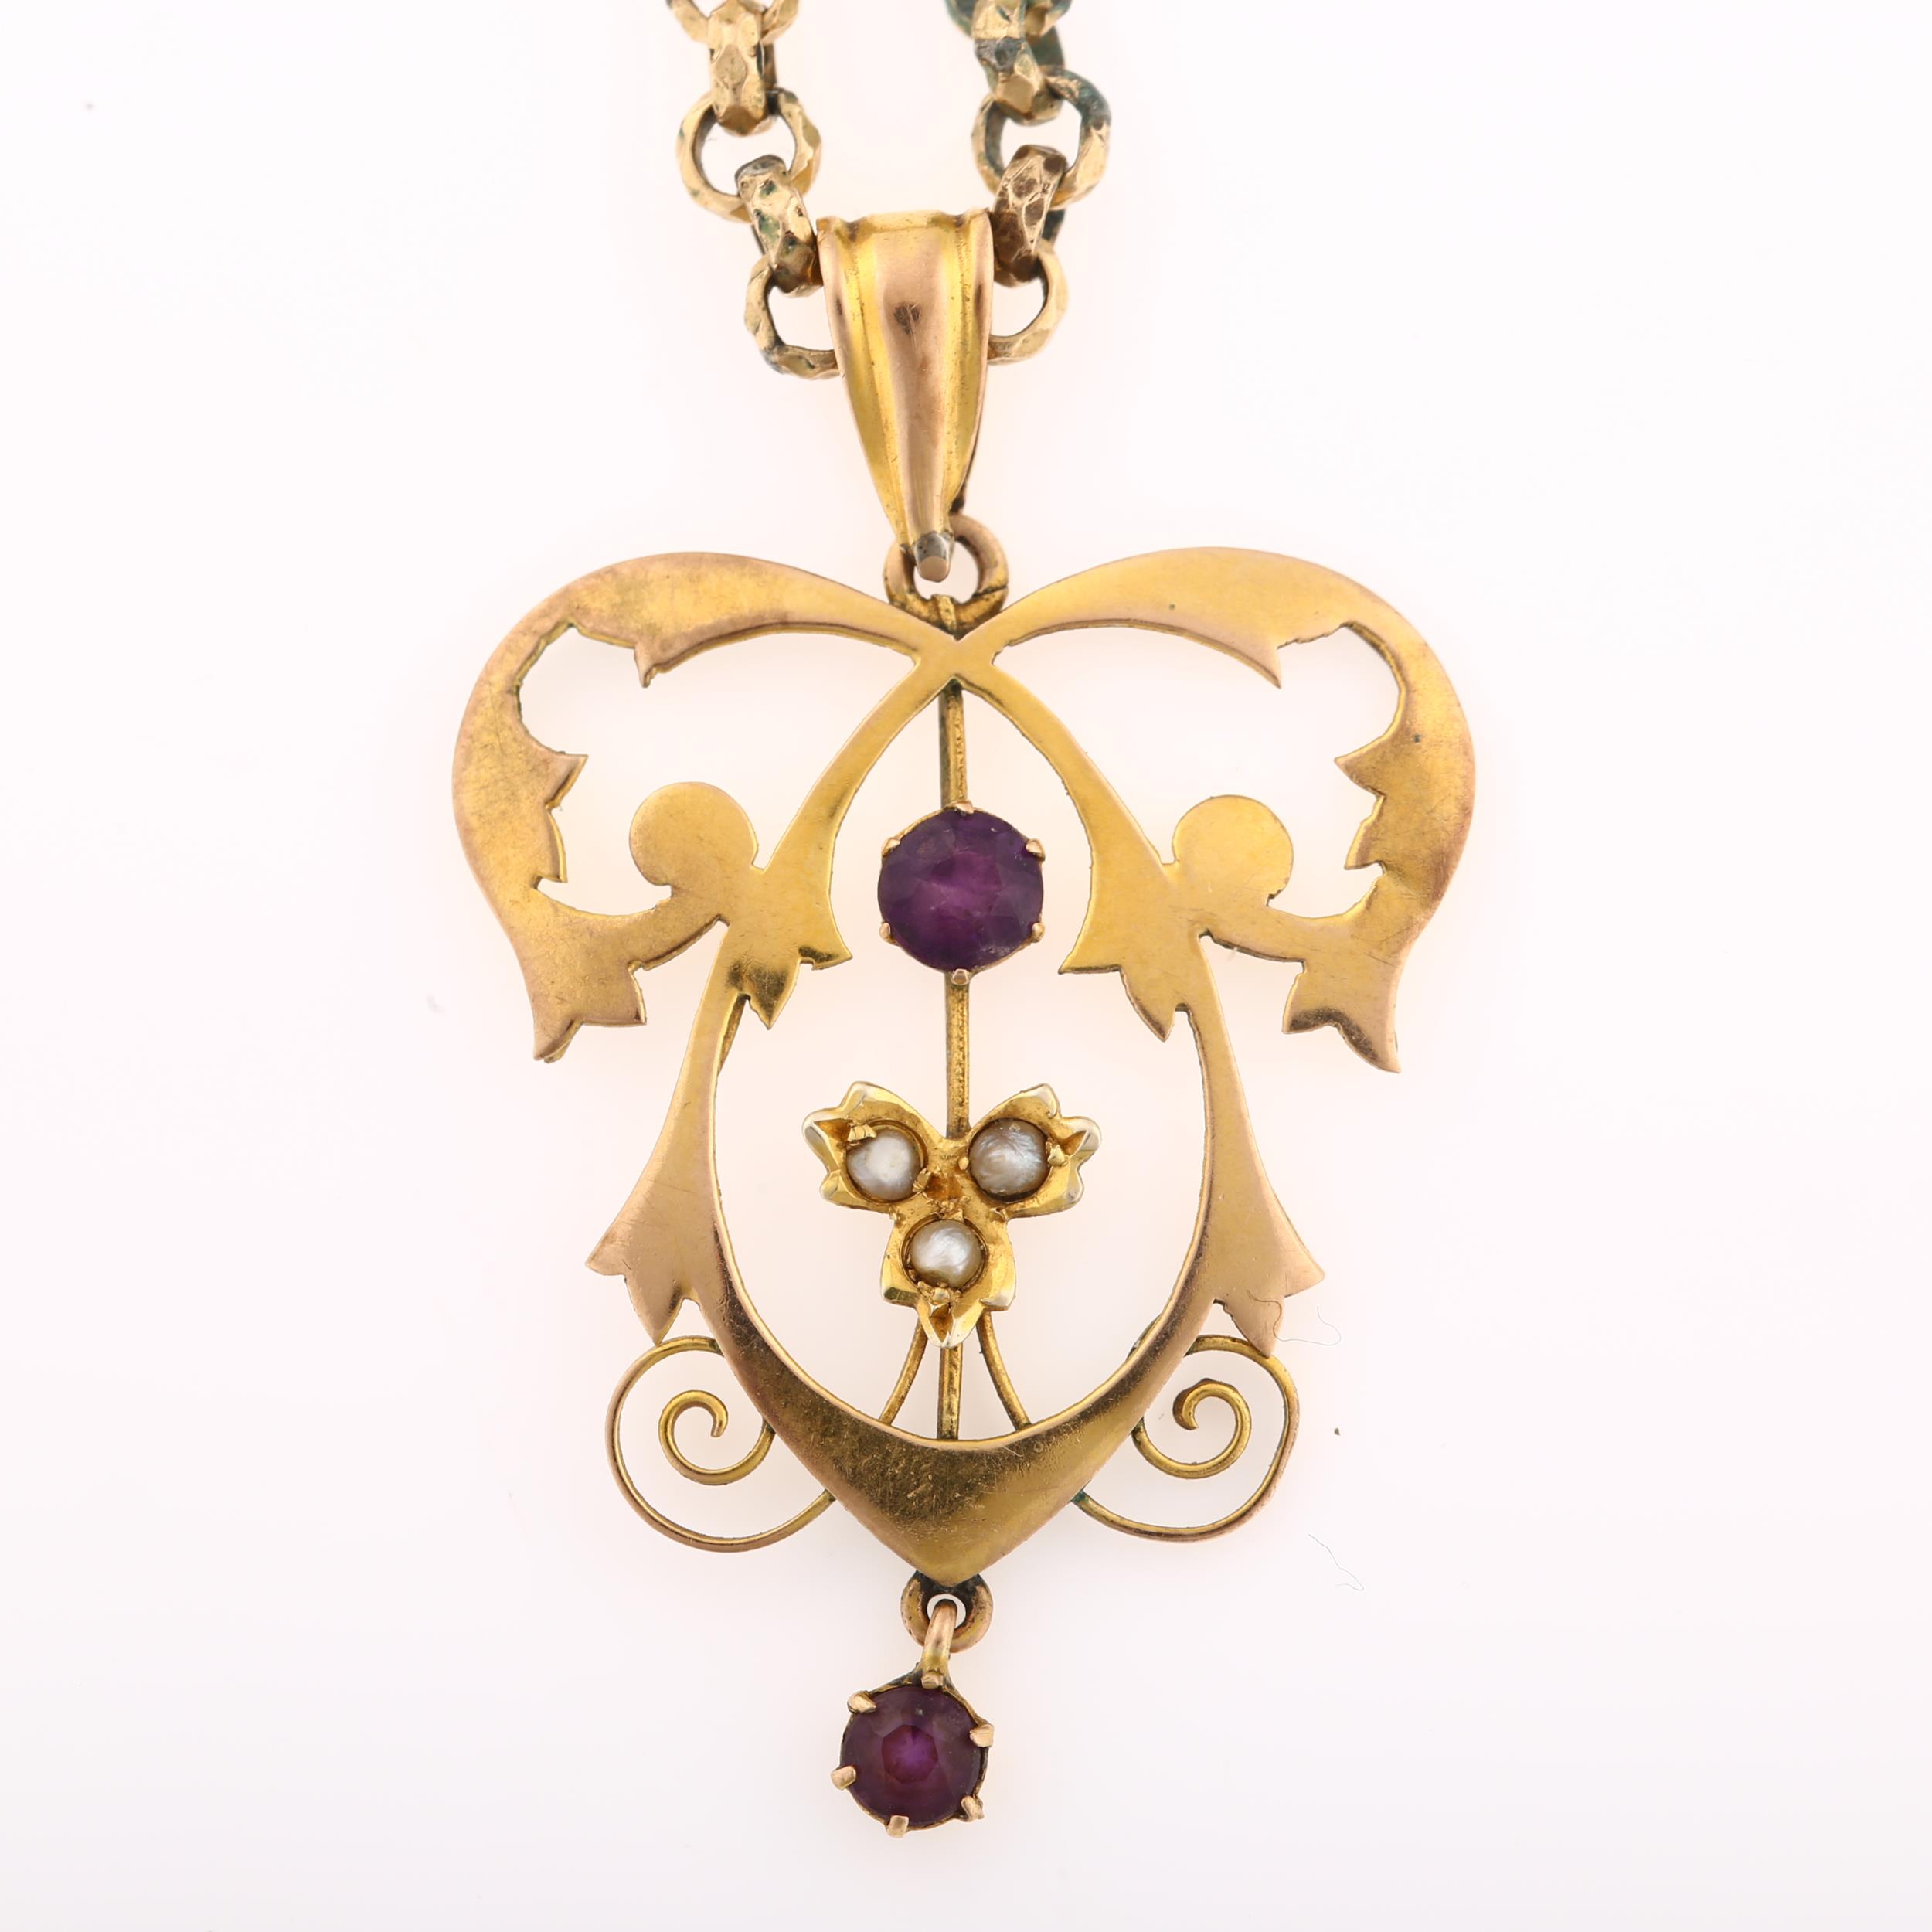 An Edwardian Art Nouveau 9ct gold amethyst and pearl openwork pendant necklace, on gold plated - Image 2 of 4